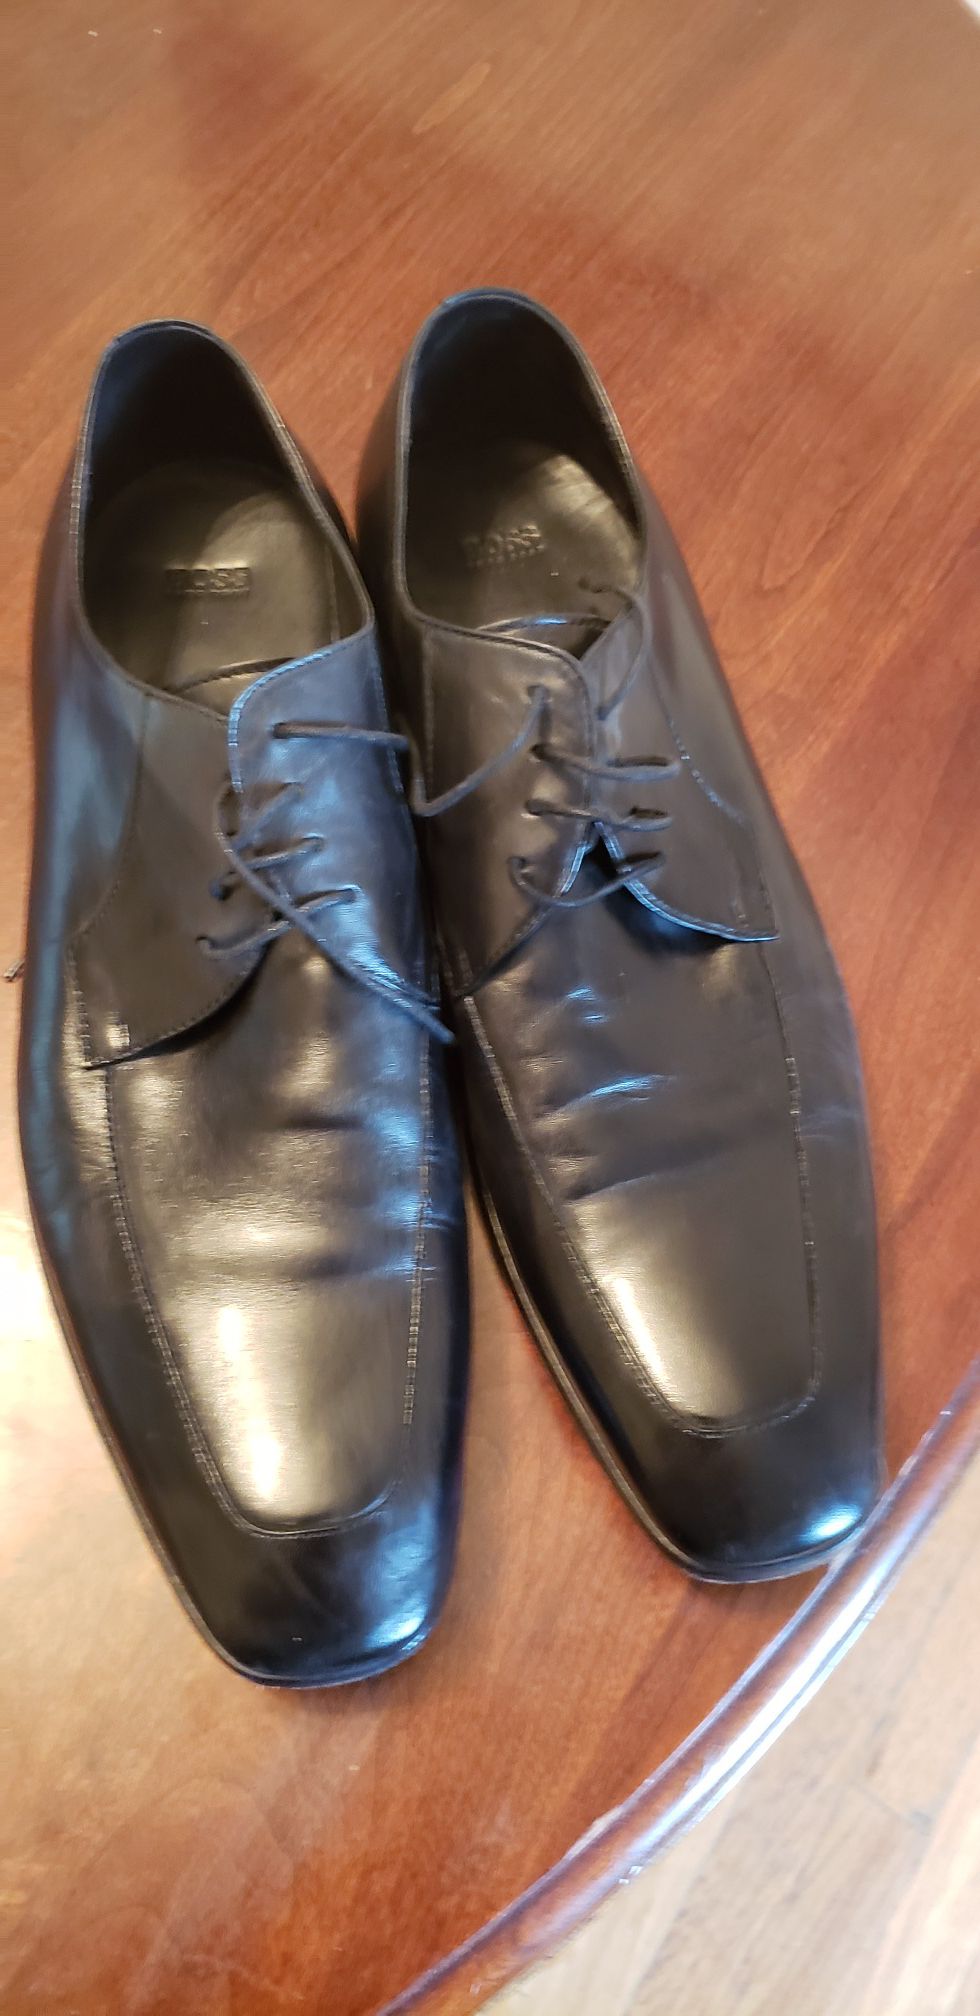 Hugo Boss real leather dress shoes size 14